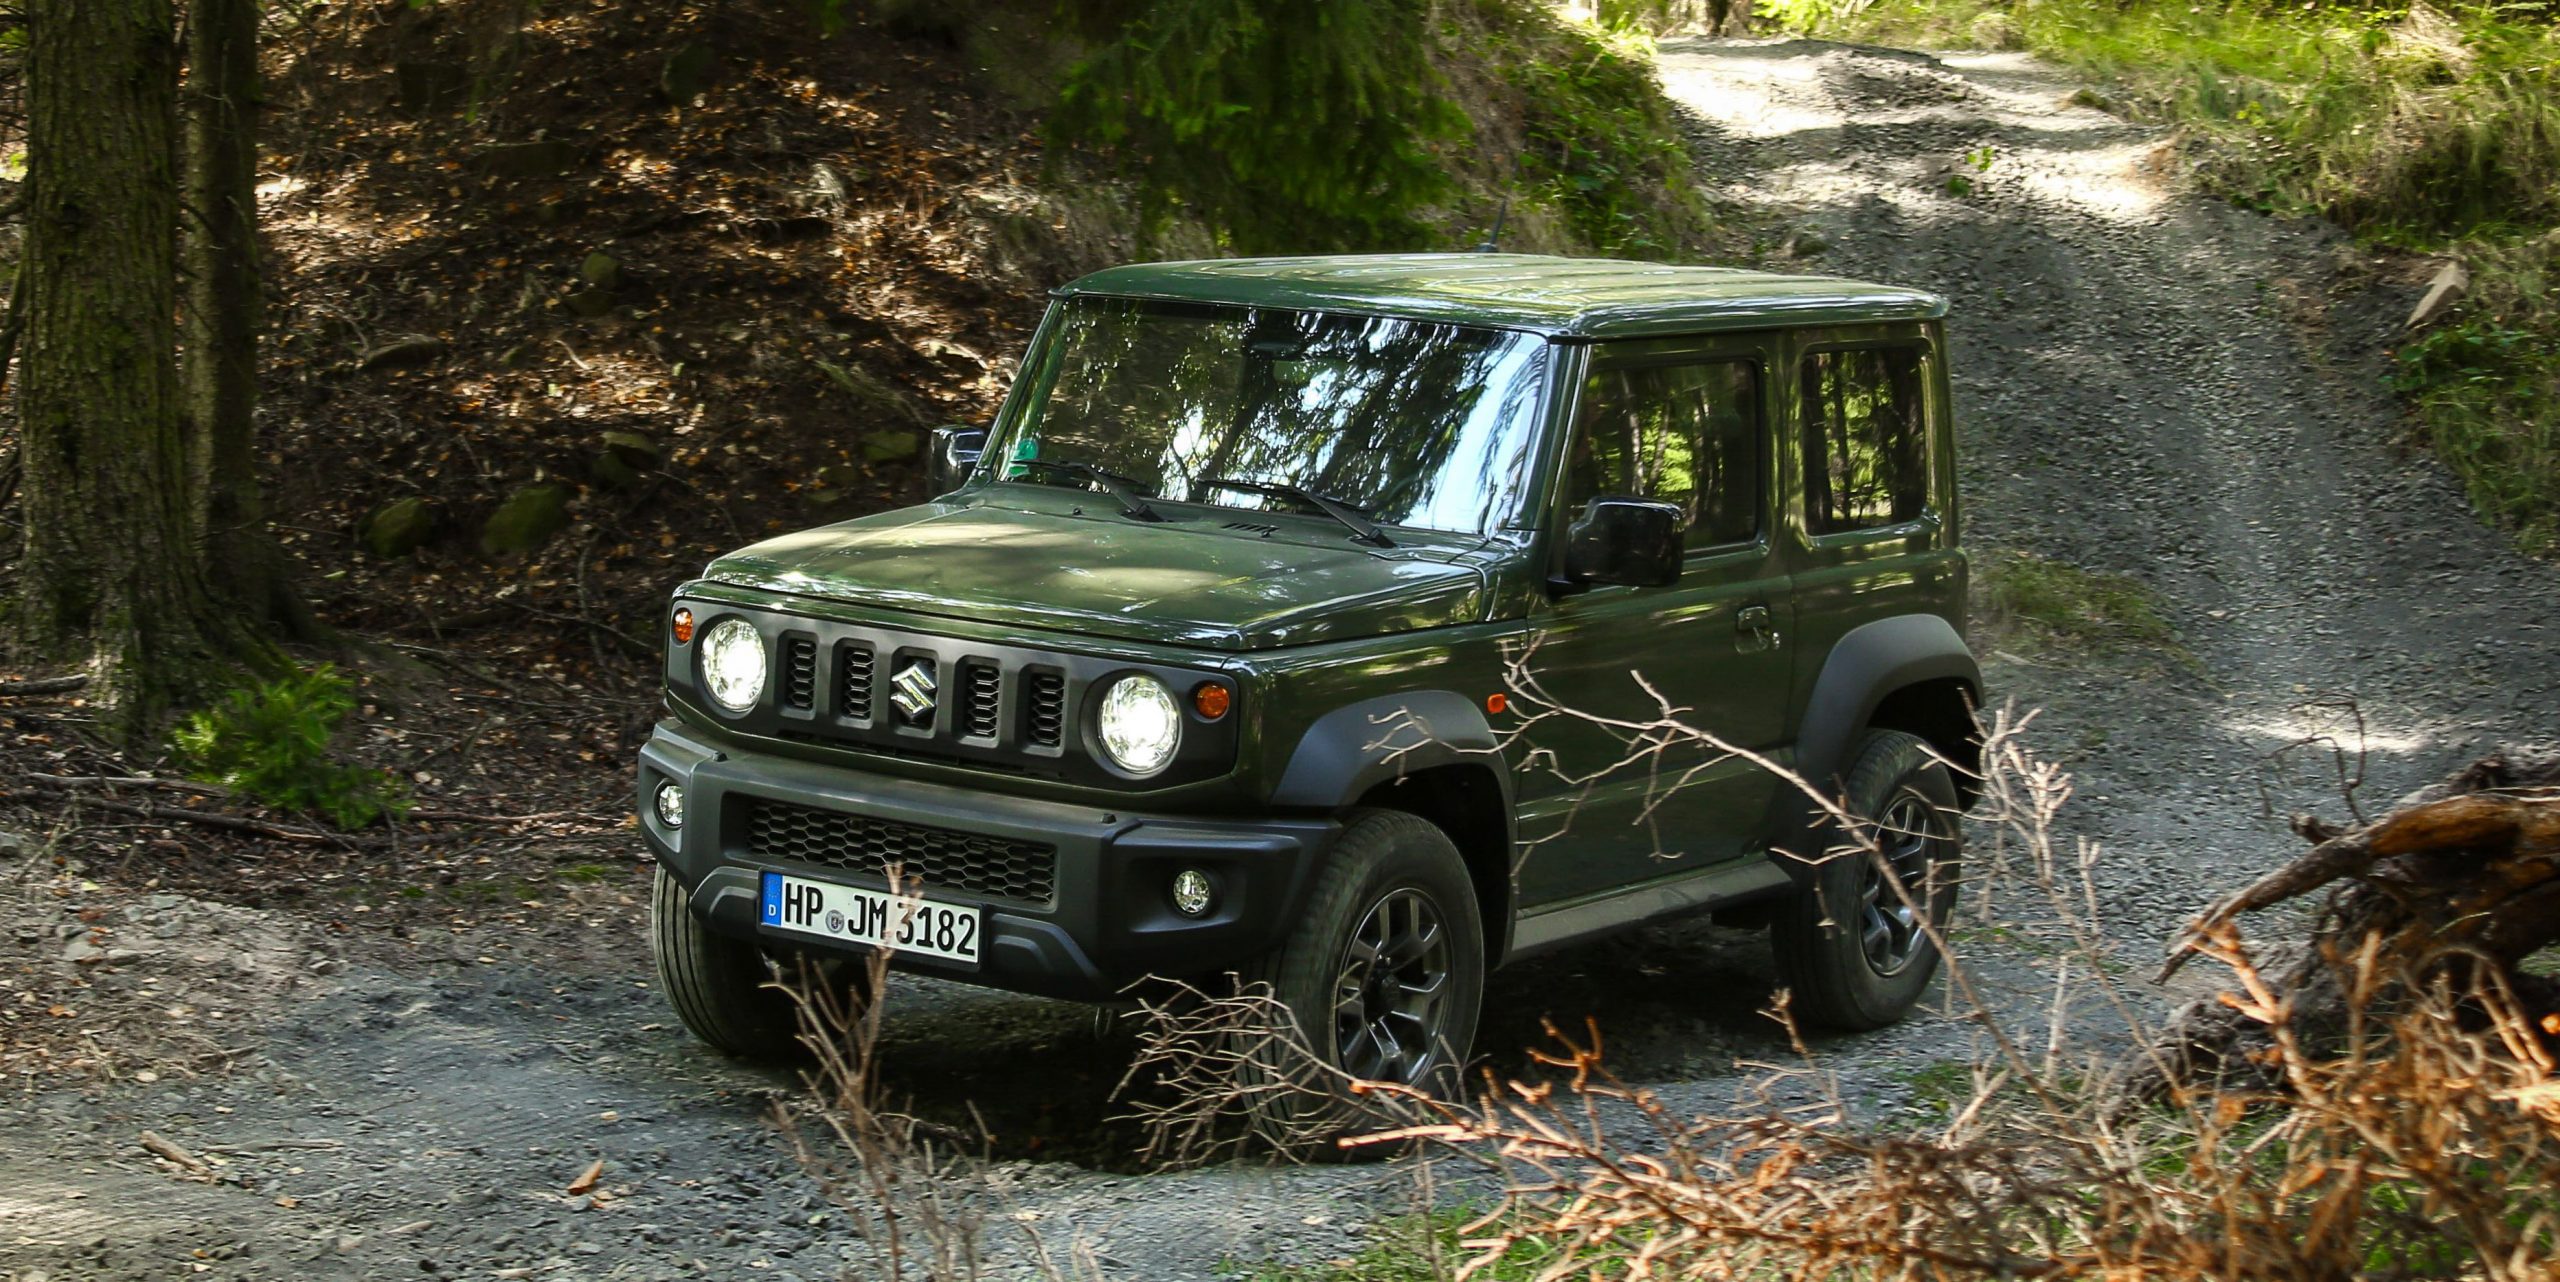 2020 Suzuki Jimny Is an Adorable and Tiny Off-Road Box that We Can’t Buy